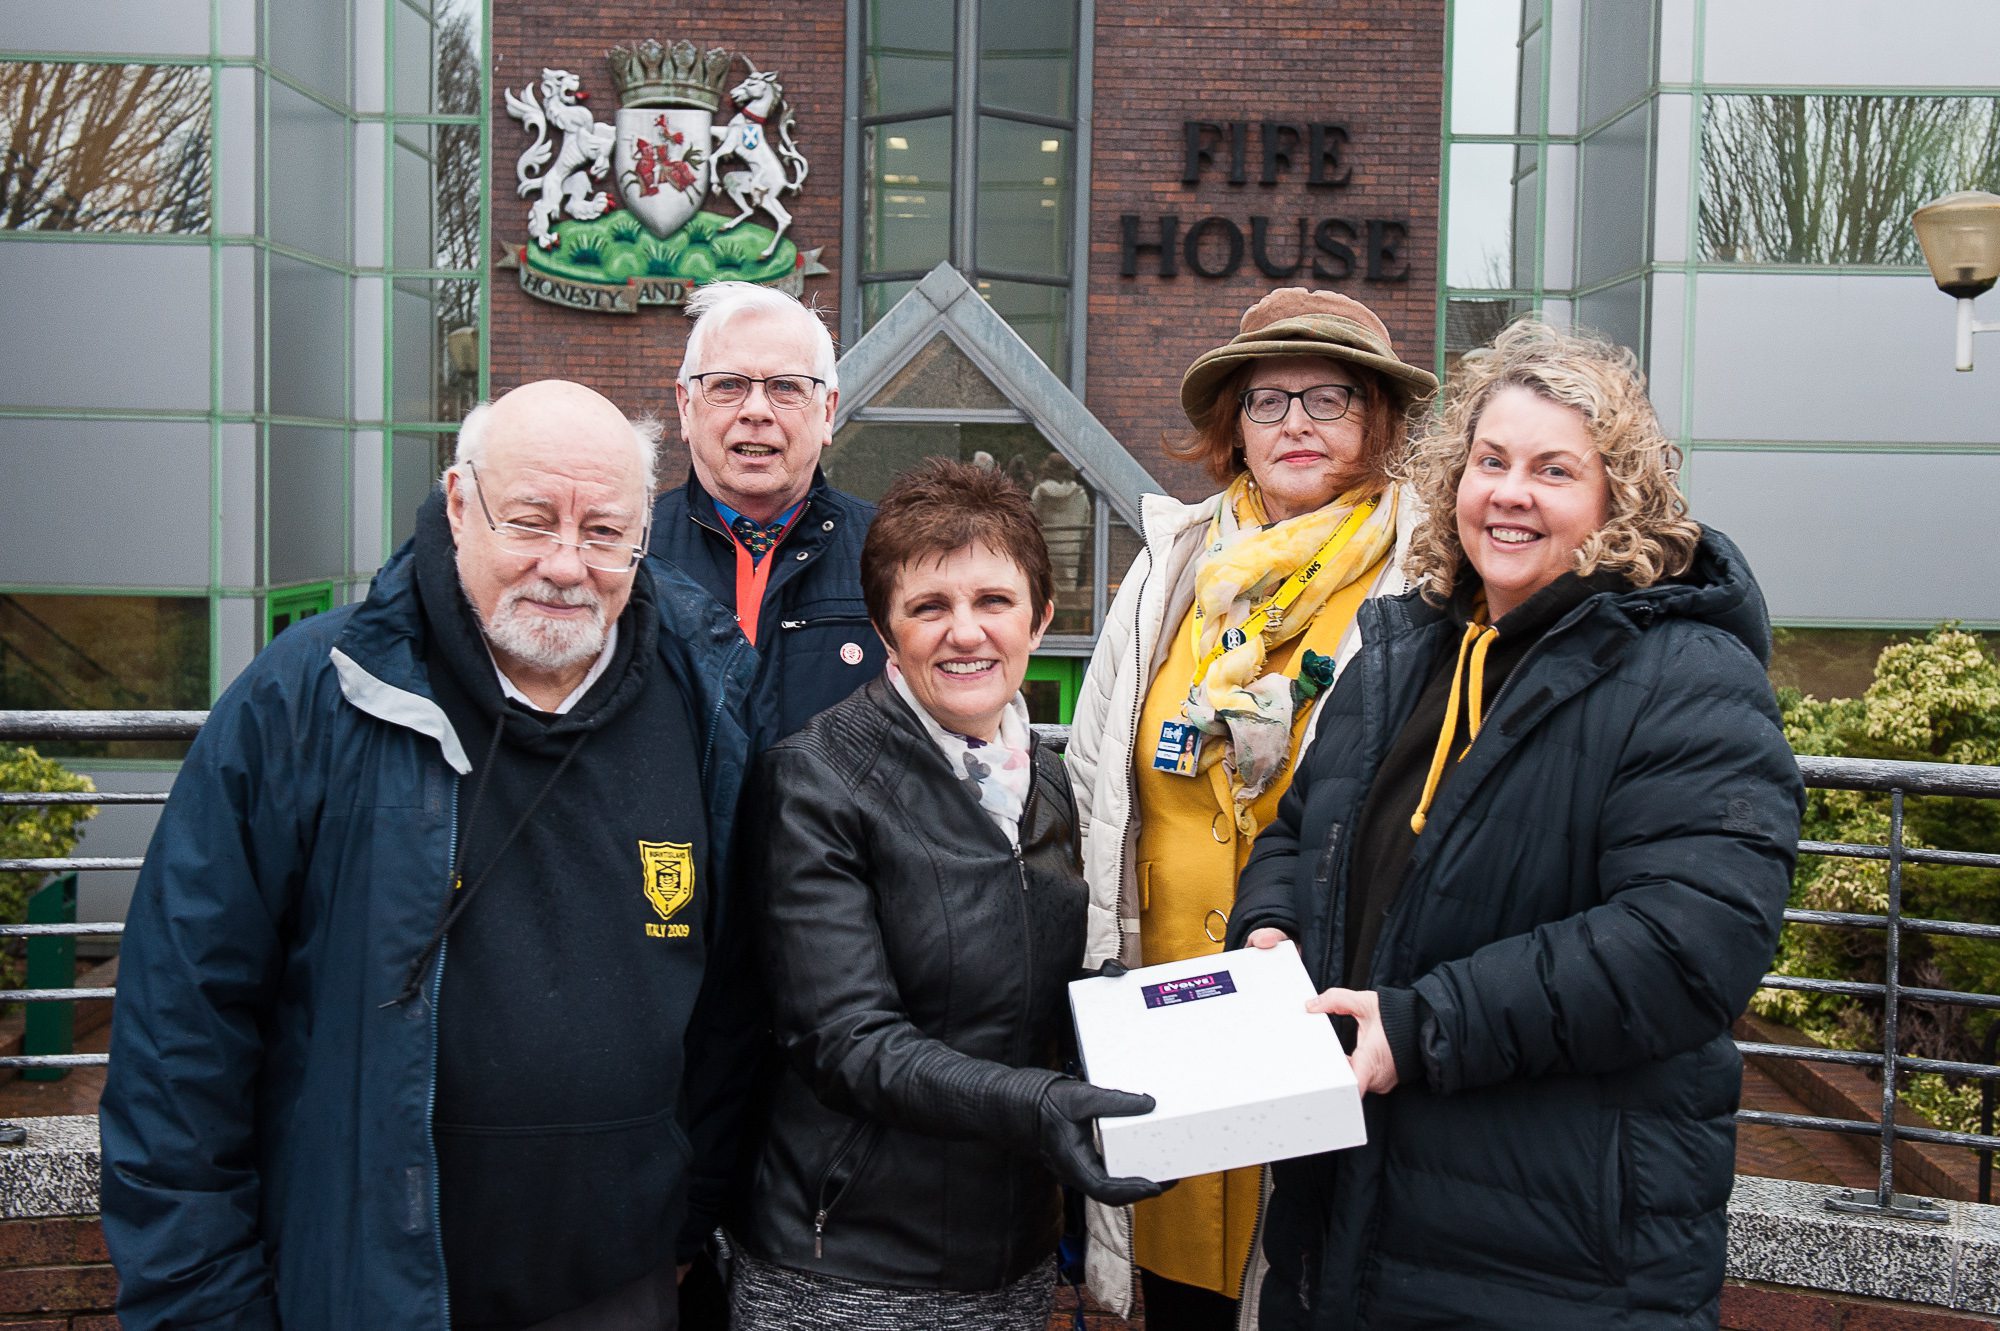 Bob Main, vice chairman, and Bridget Fraser, chairwoman, of Burntisland Amateur Swimming Club, hand the petition to Cllr Judy Hamilton, with Cllr Gordon Langlands, and Cllr Lesley Backhouse behind